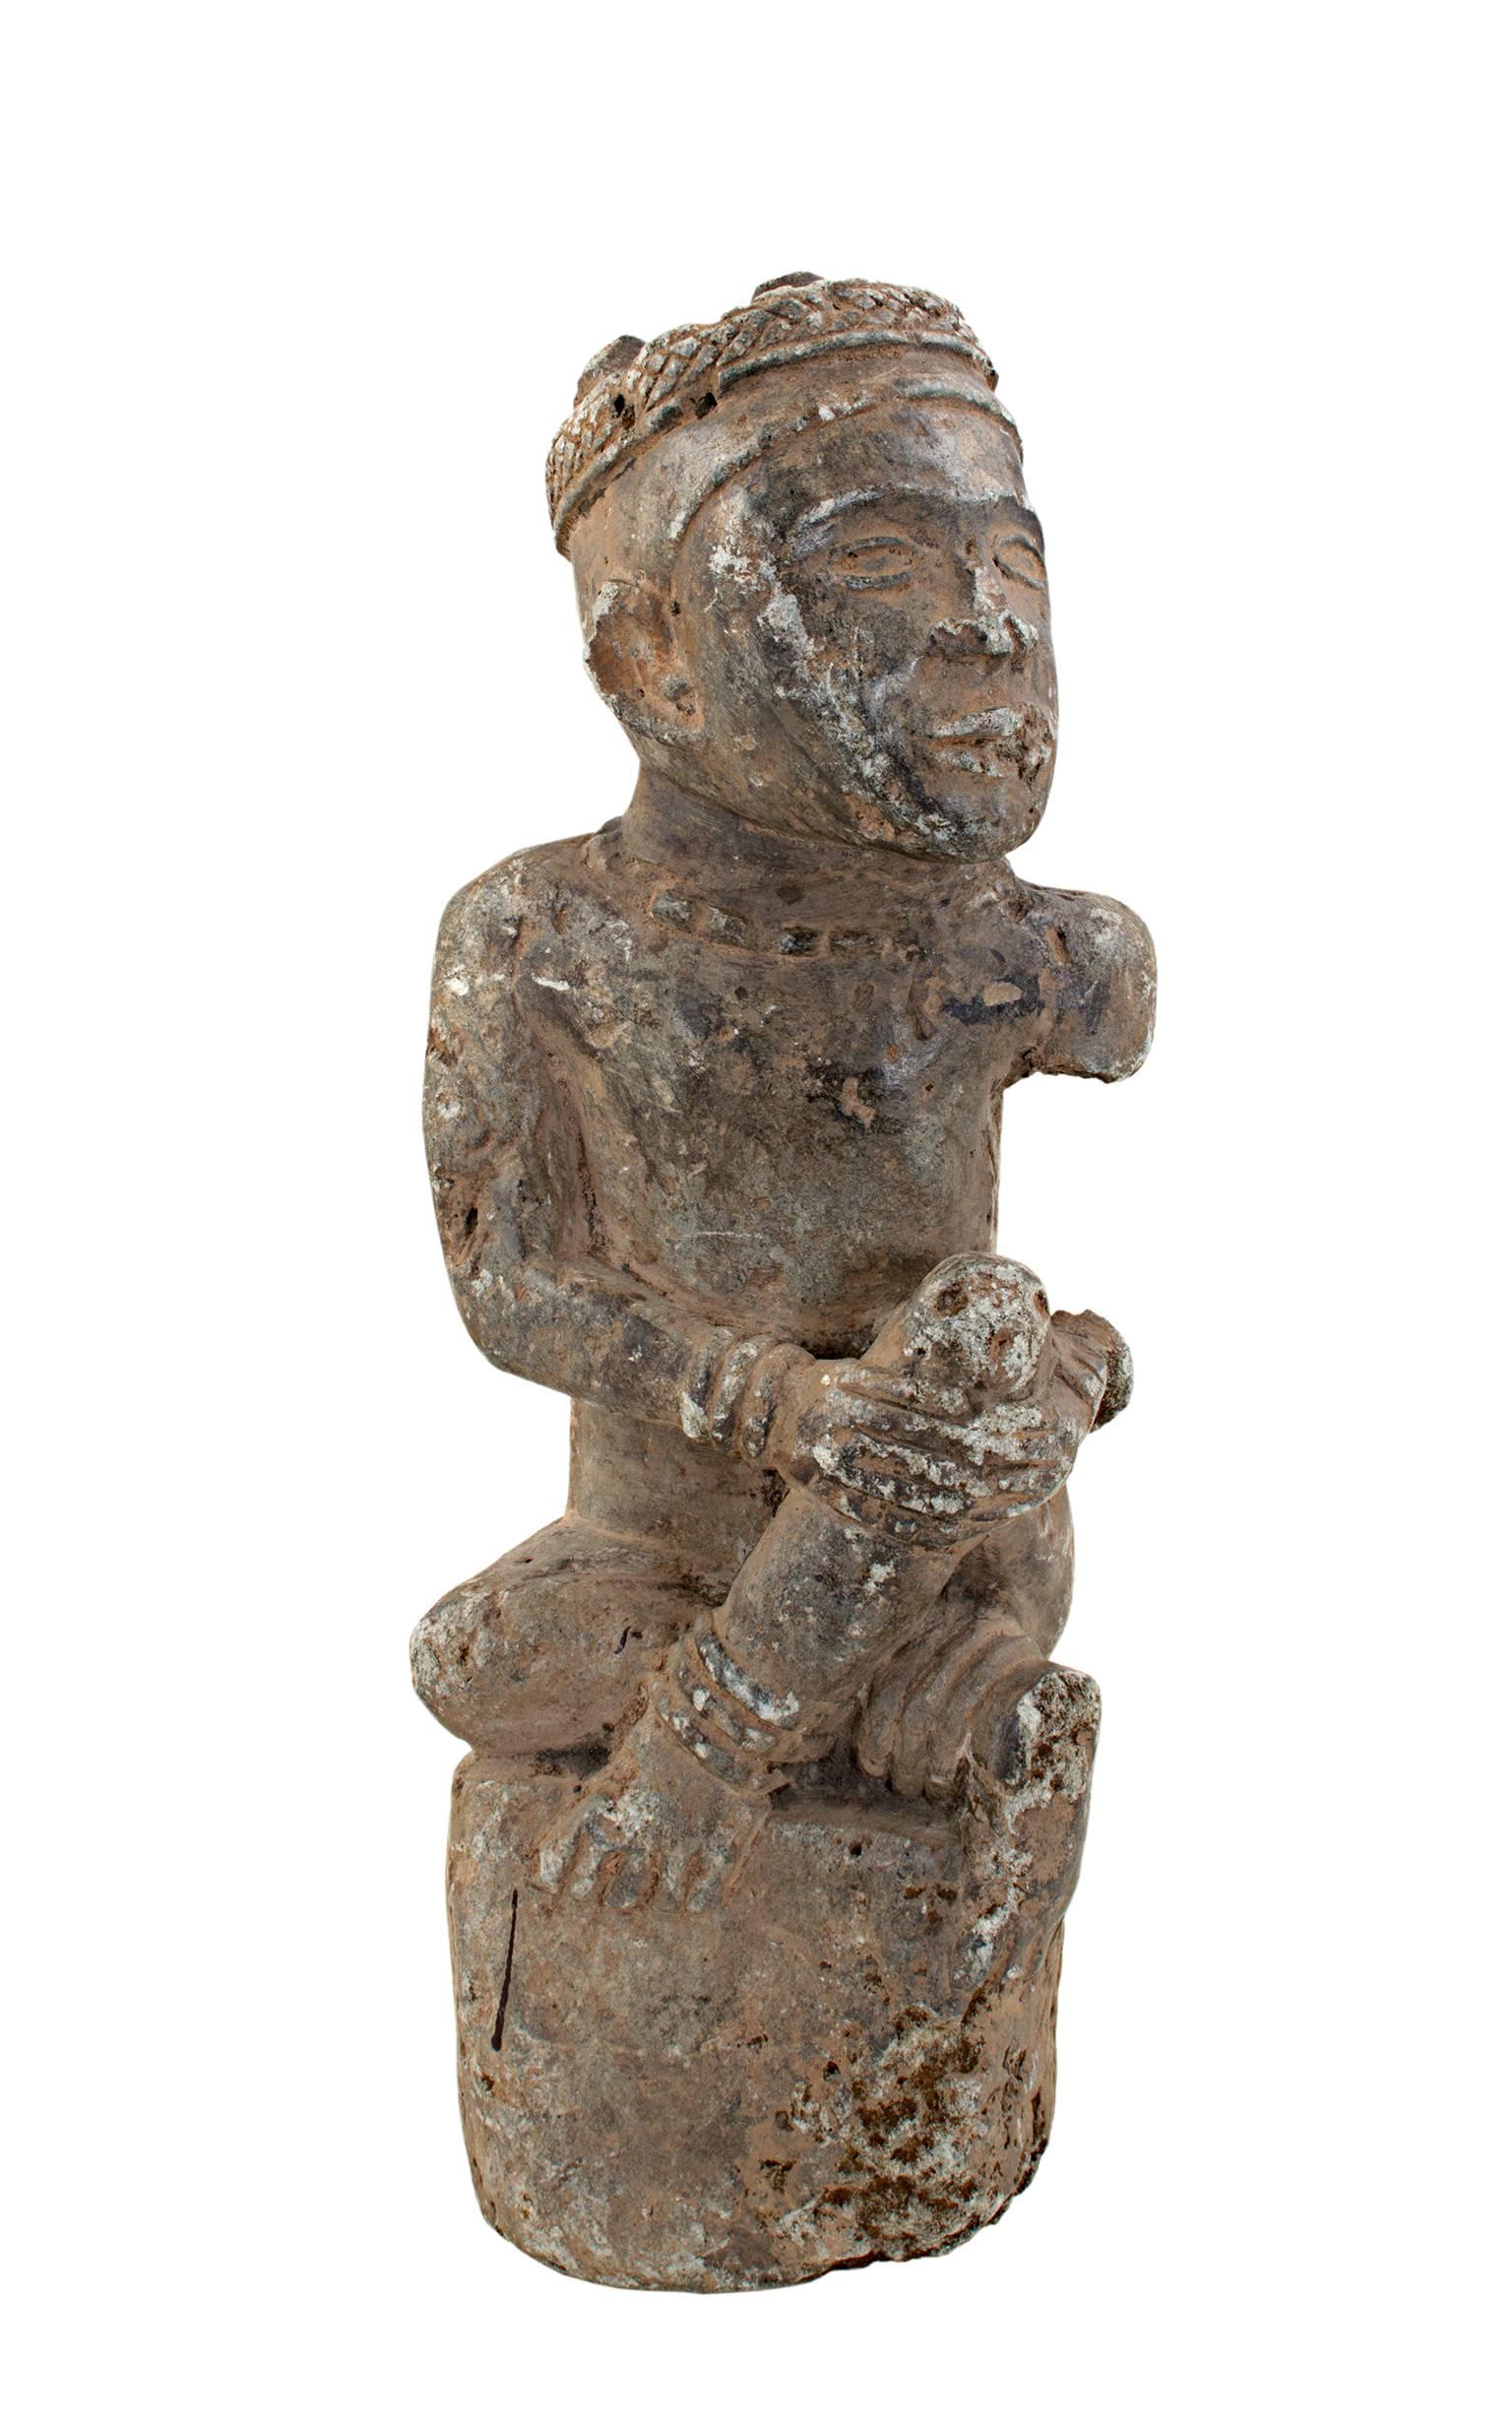 "N'Tadi King - Zaire, " Carved Cothe Stone Sculpture created between 1800-1850